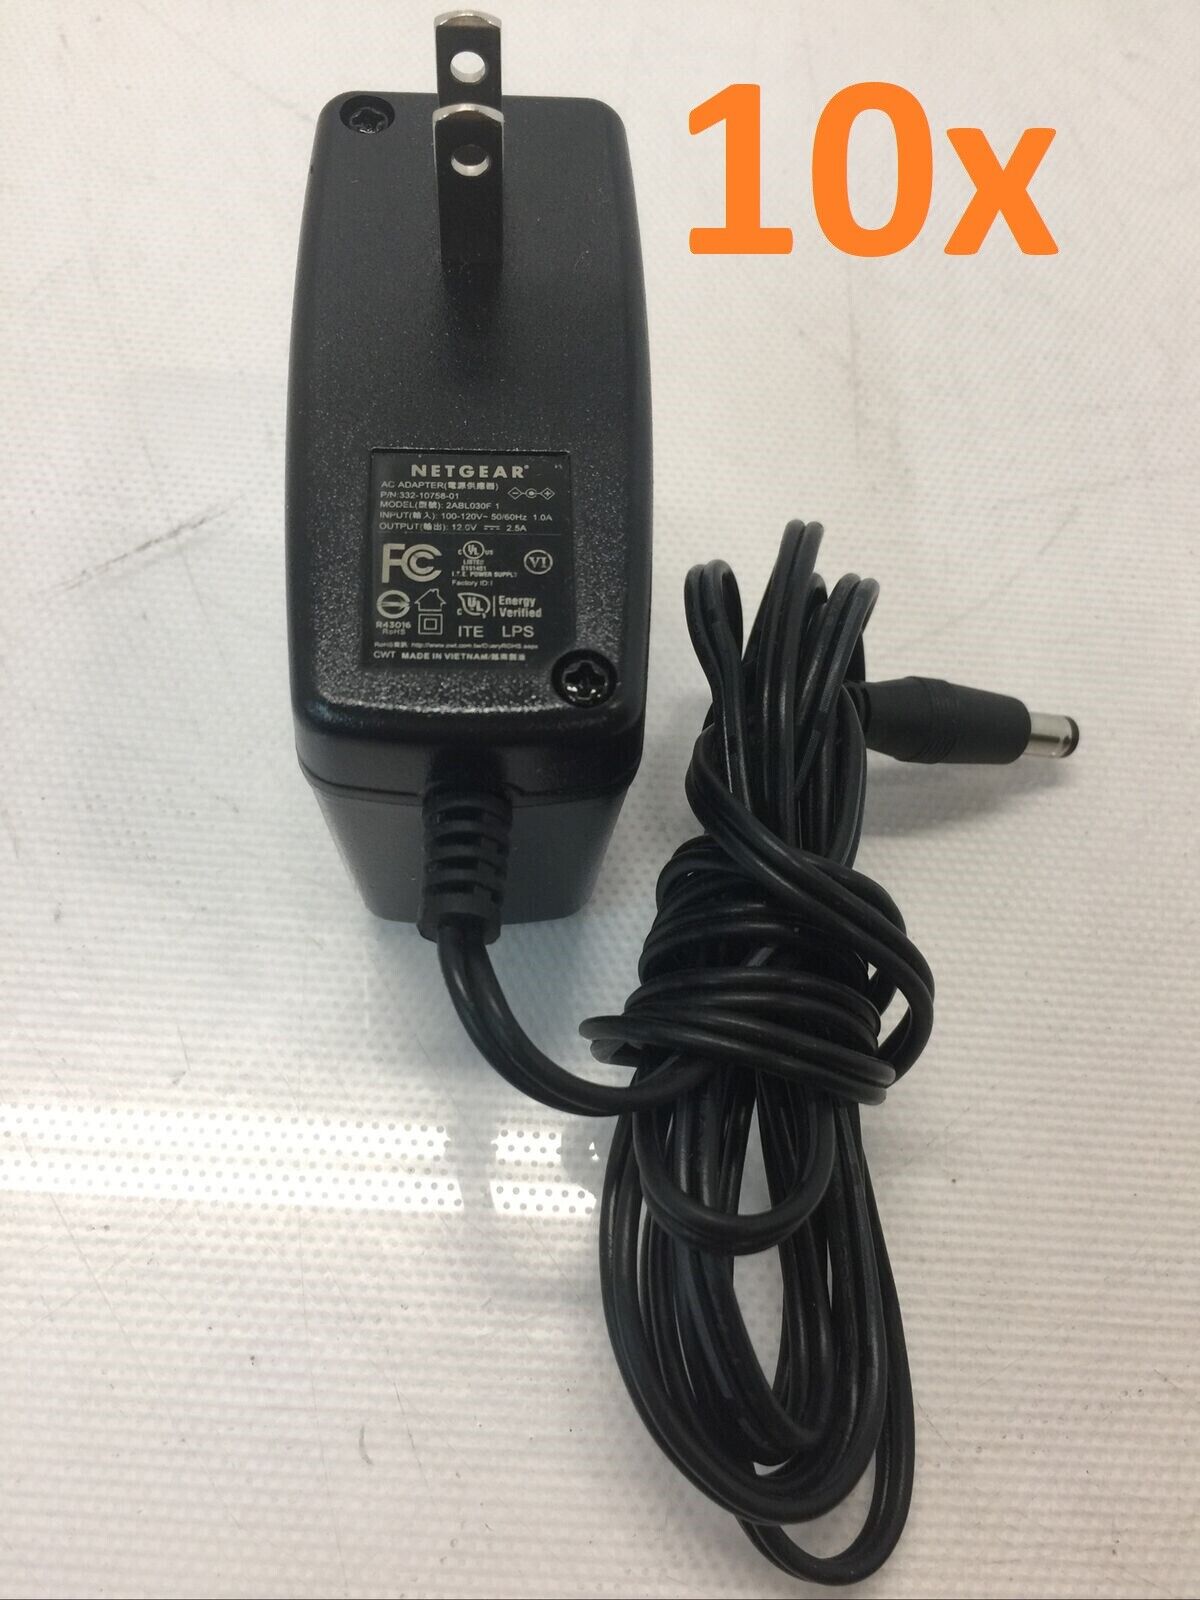 (10) Netgear 12V 2.5A AC Adapter 2ABL030F Power Supply 332-10758-01 Charger